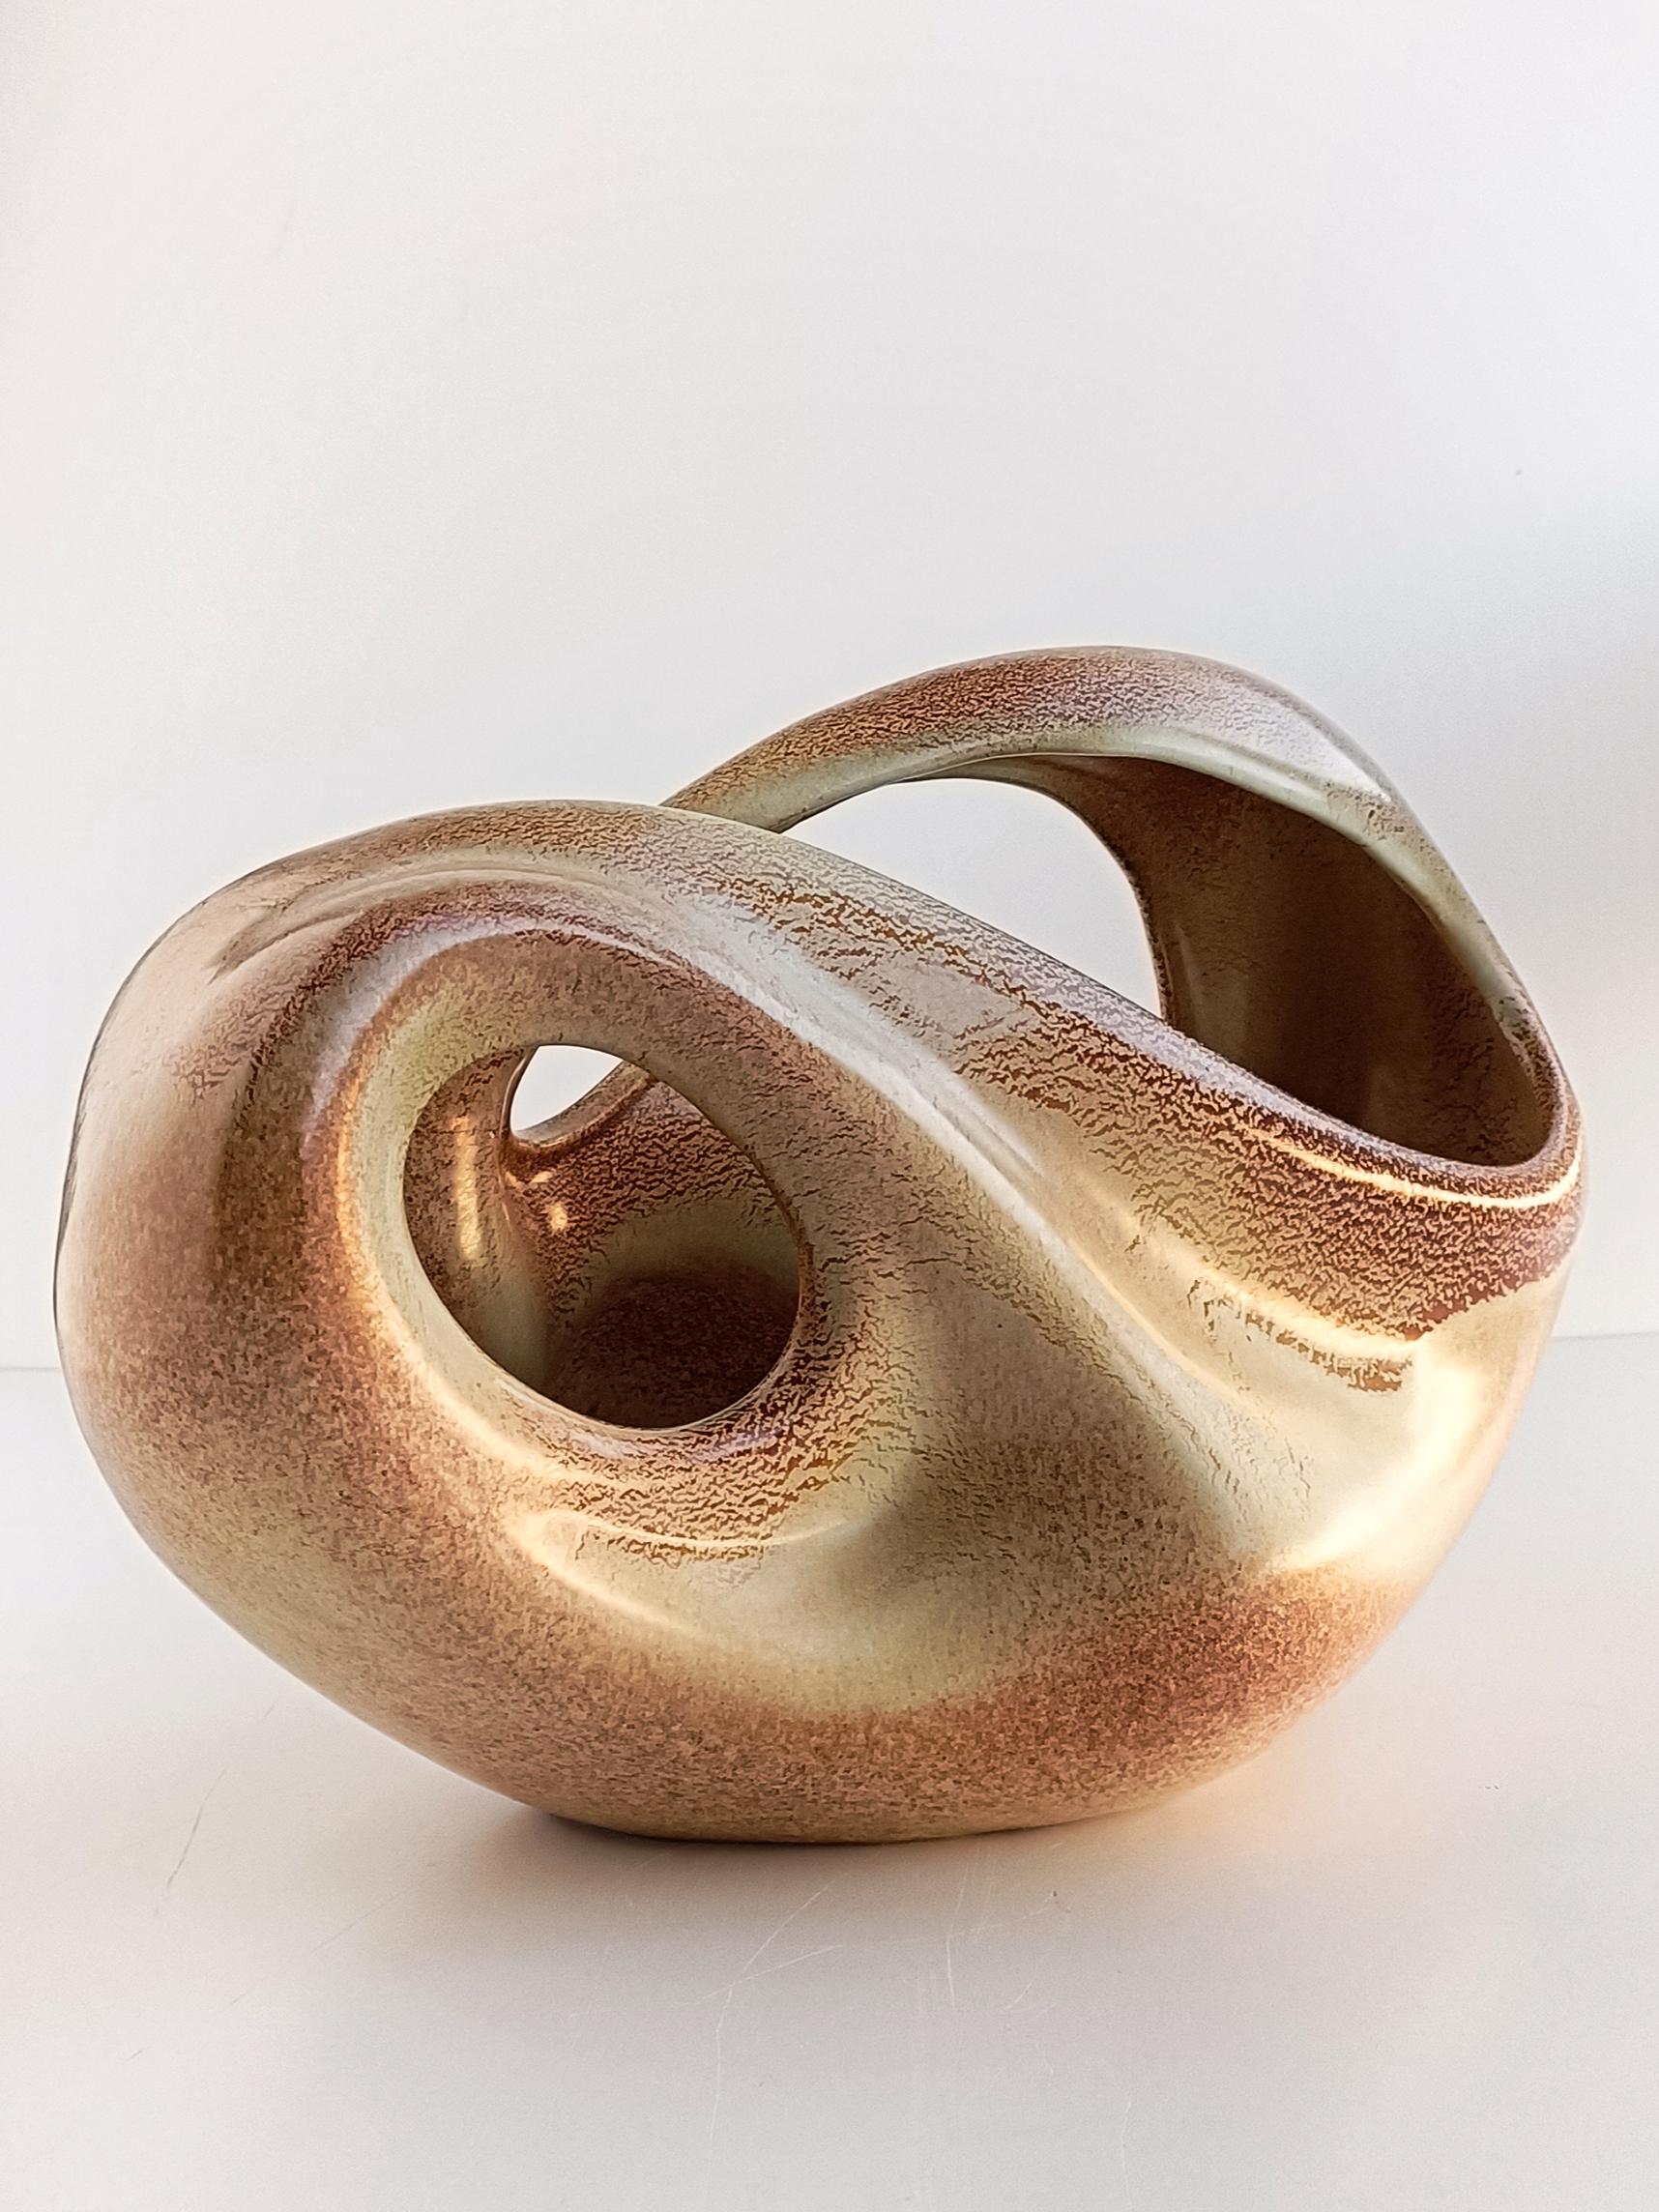 This Bertoncello sculptural ceramic vase from Italy, dating back to the 1960s, is a remarkable piece of Italian ceramic artistry. Roberto Rigon was a notable designer associated with Bertoncello, a renowned ceramics manufacturer based in Italy